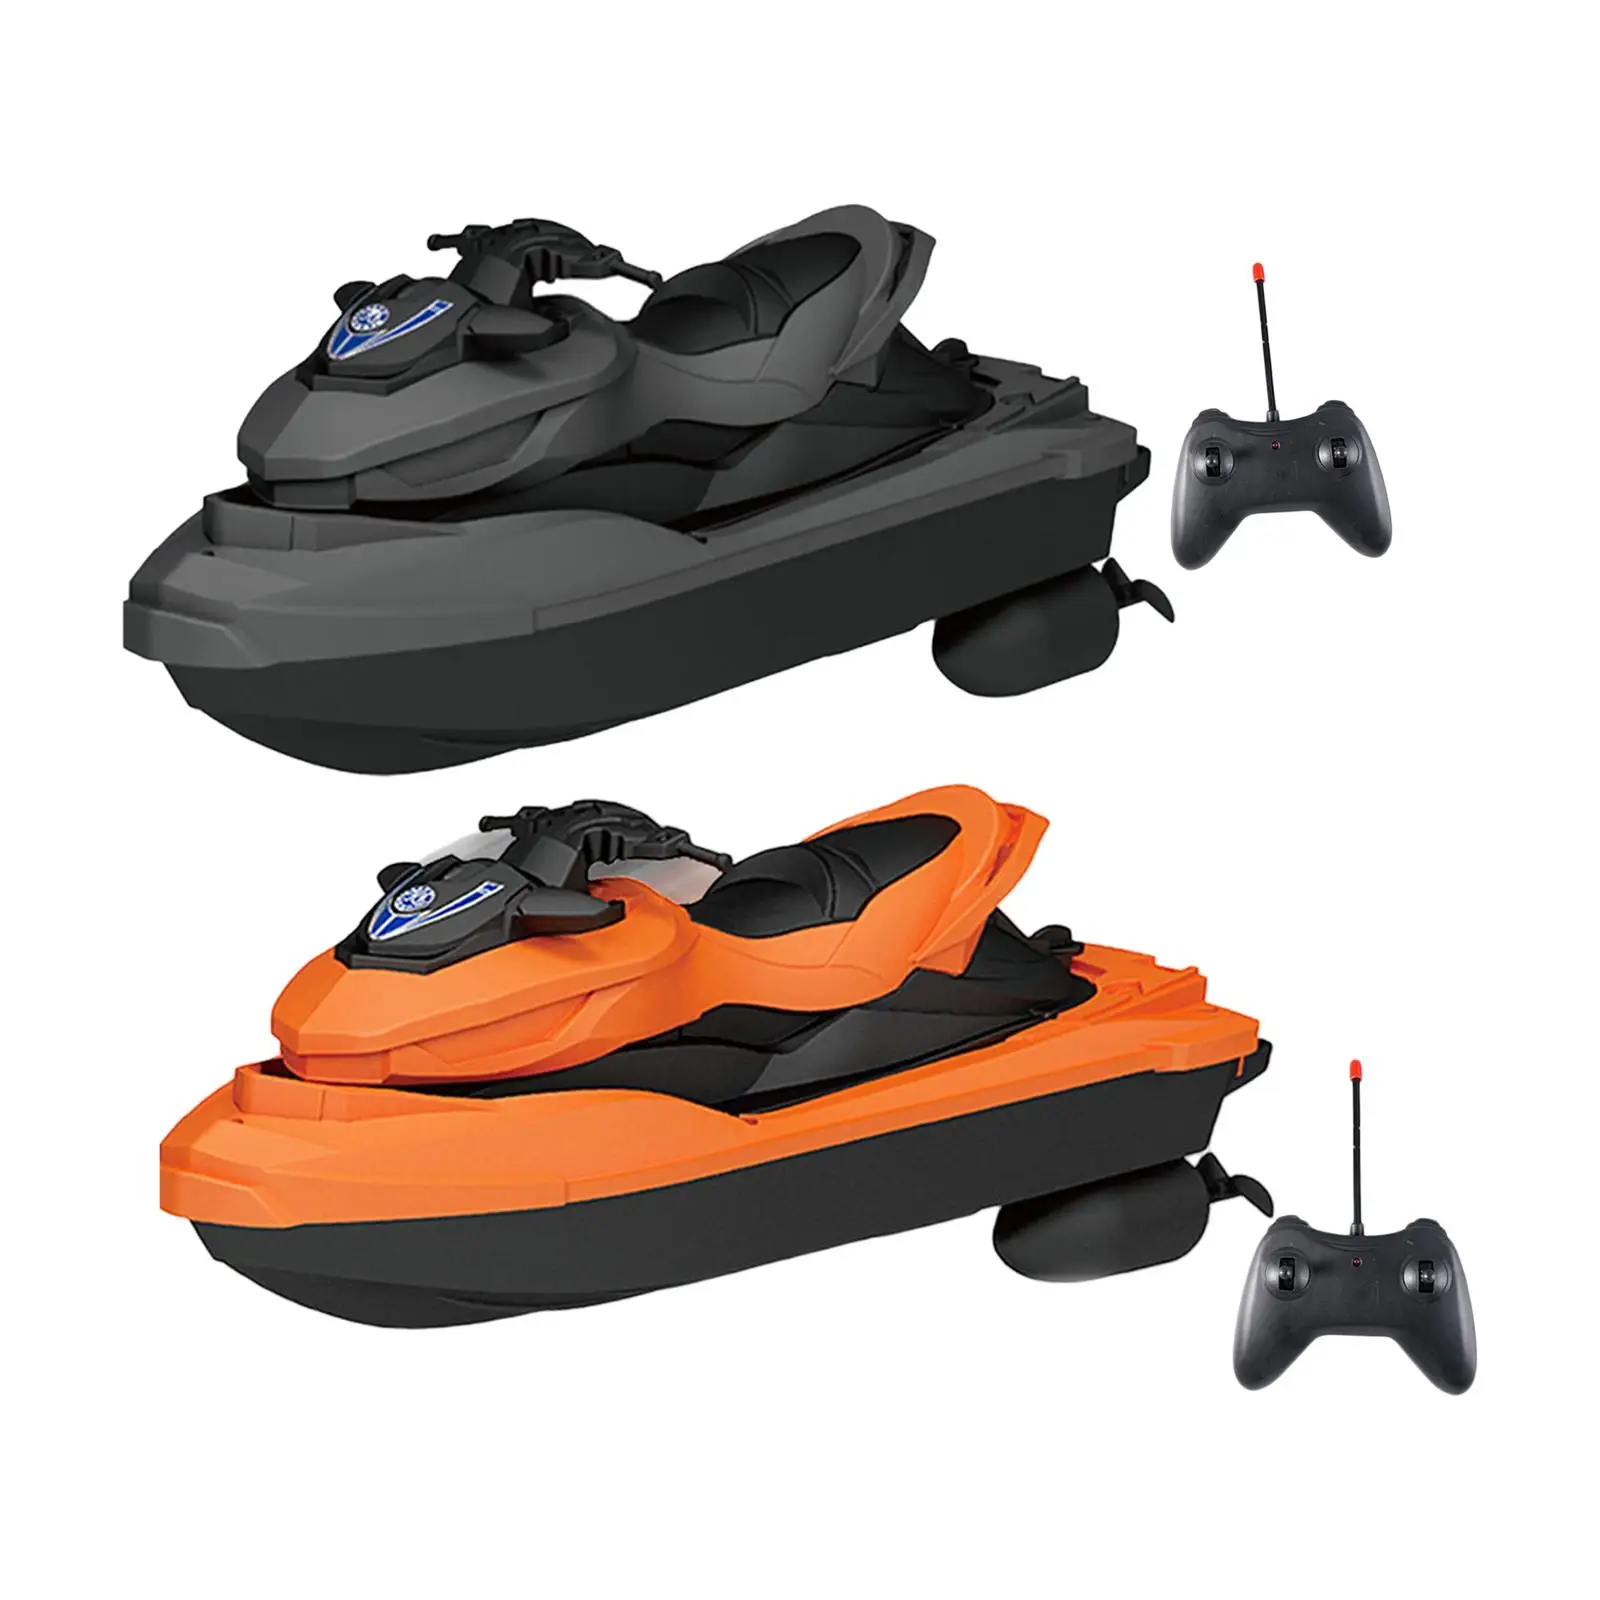 2.4G Remote Control Boat Double Motor High Powerful for Outdoor Toy,